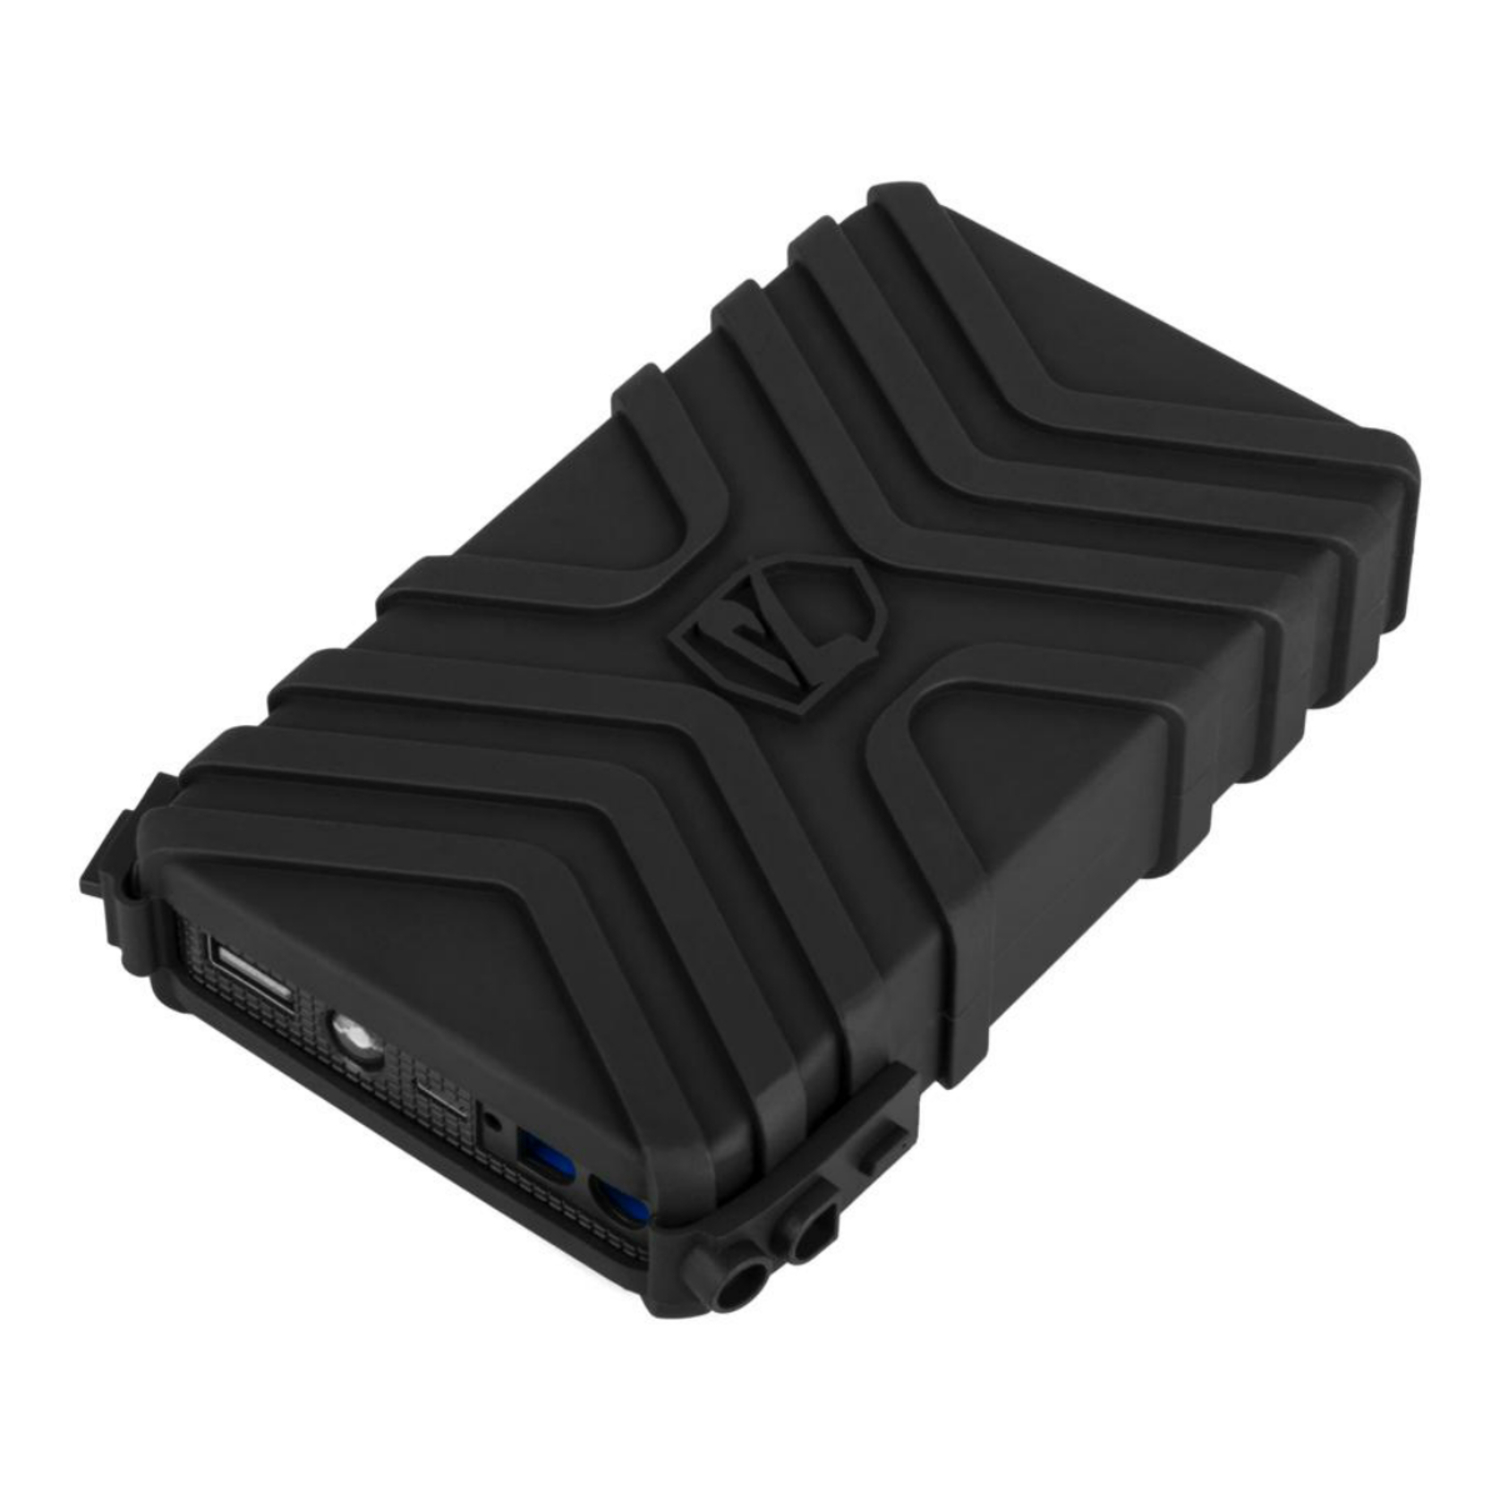 10,000 mAH Rugged Waterproof Lithium Ion Jump Starter And Portable Charger